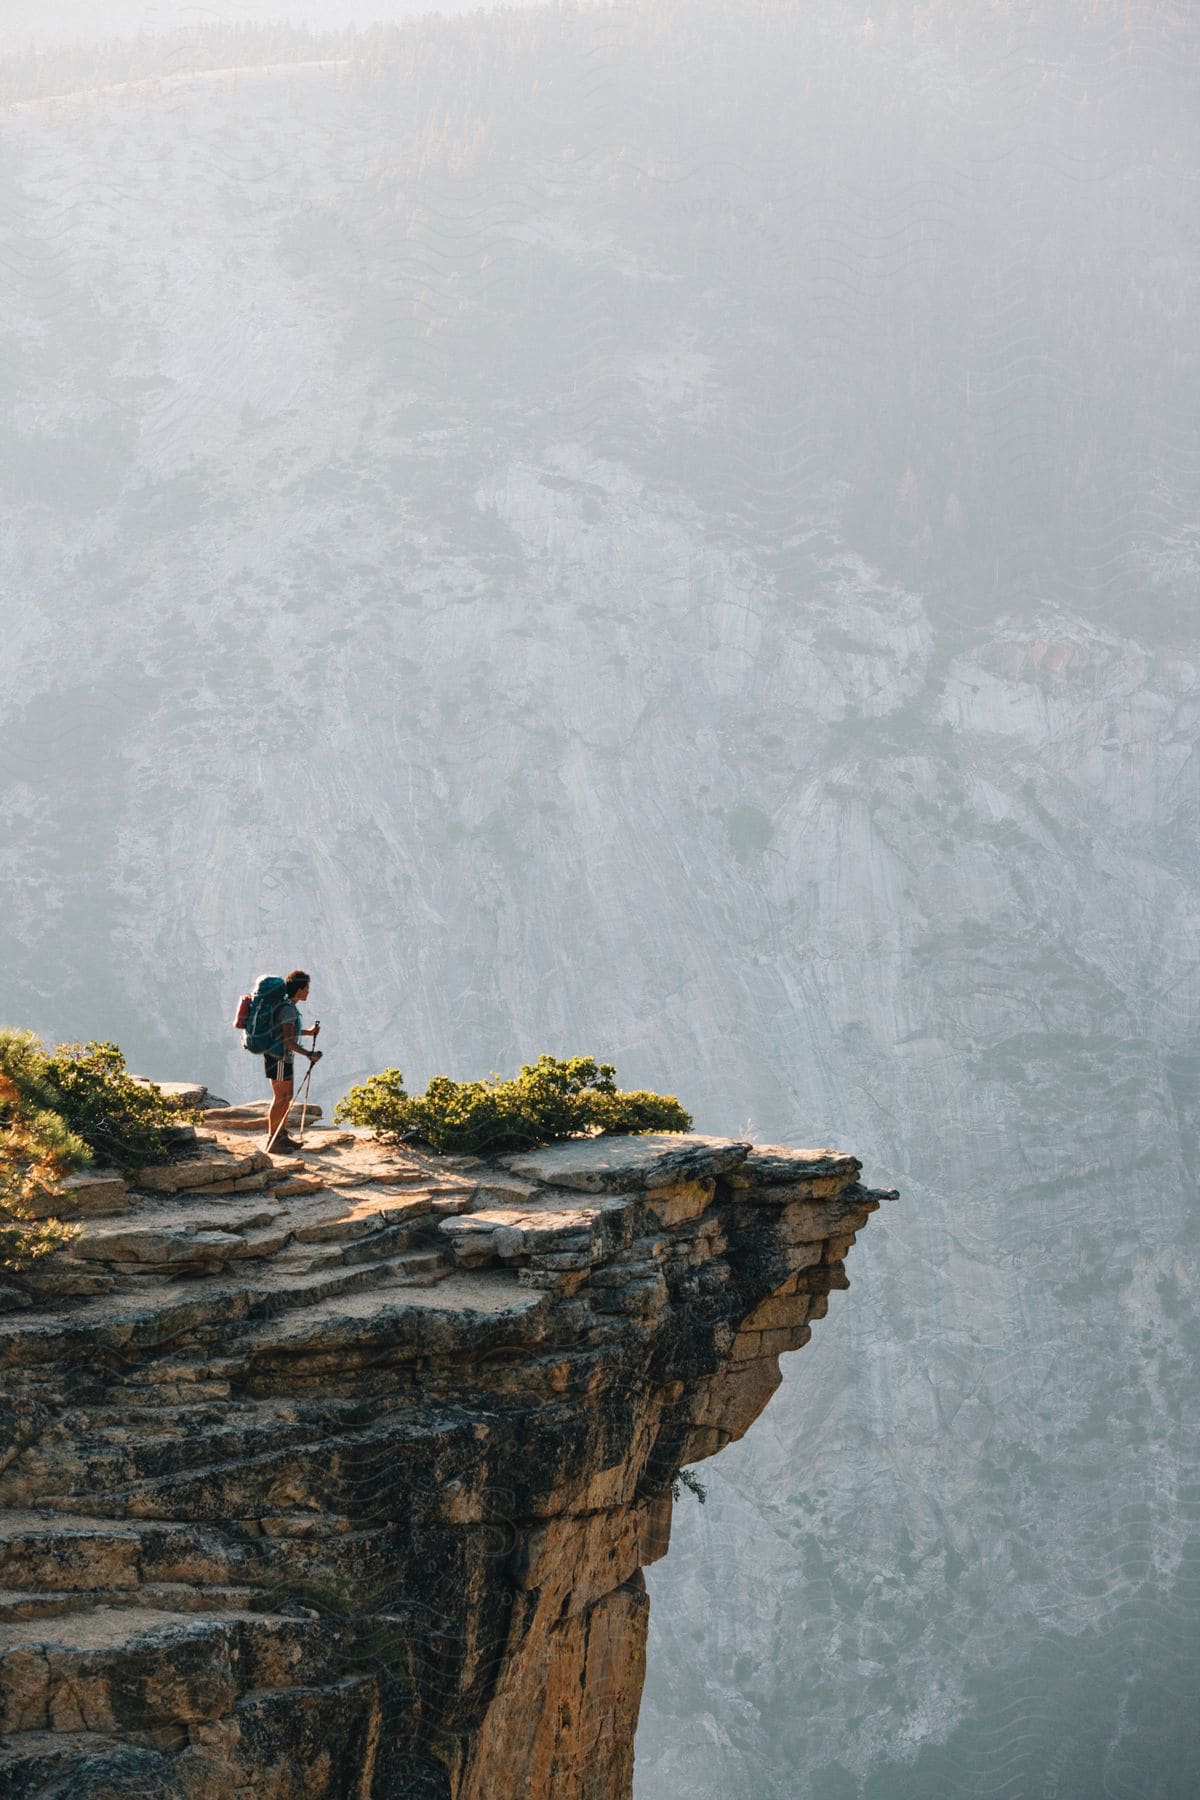 A hiker stands on a cliff edge gazing out at hazy mountains beyond holding hiking poles